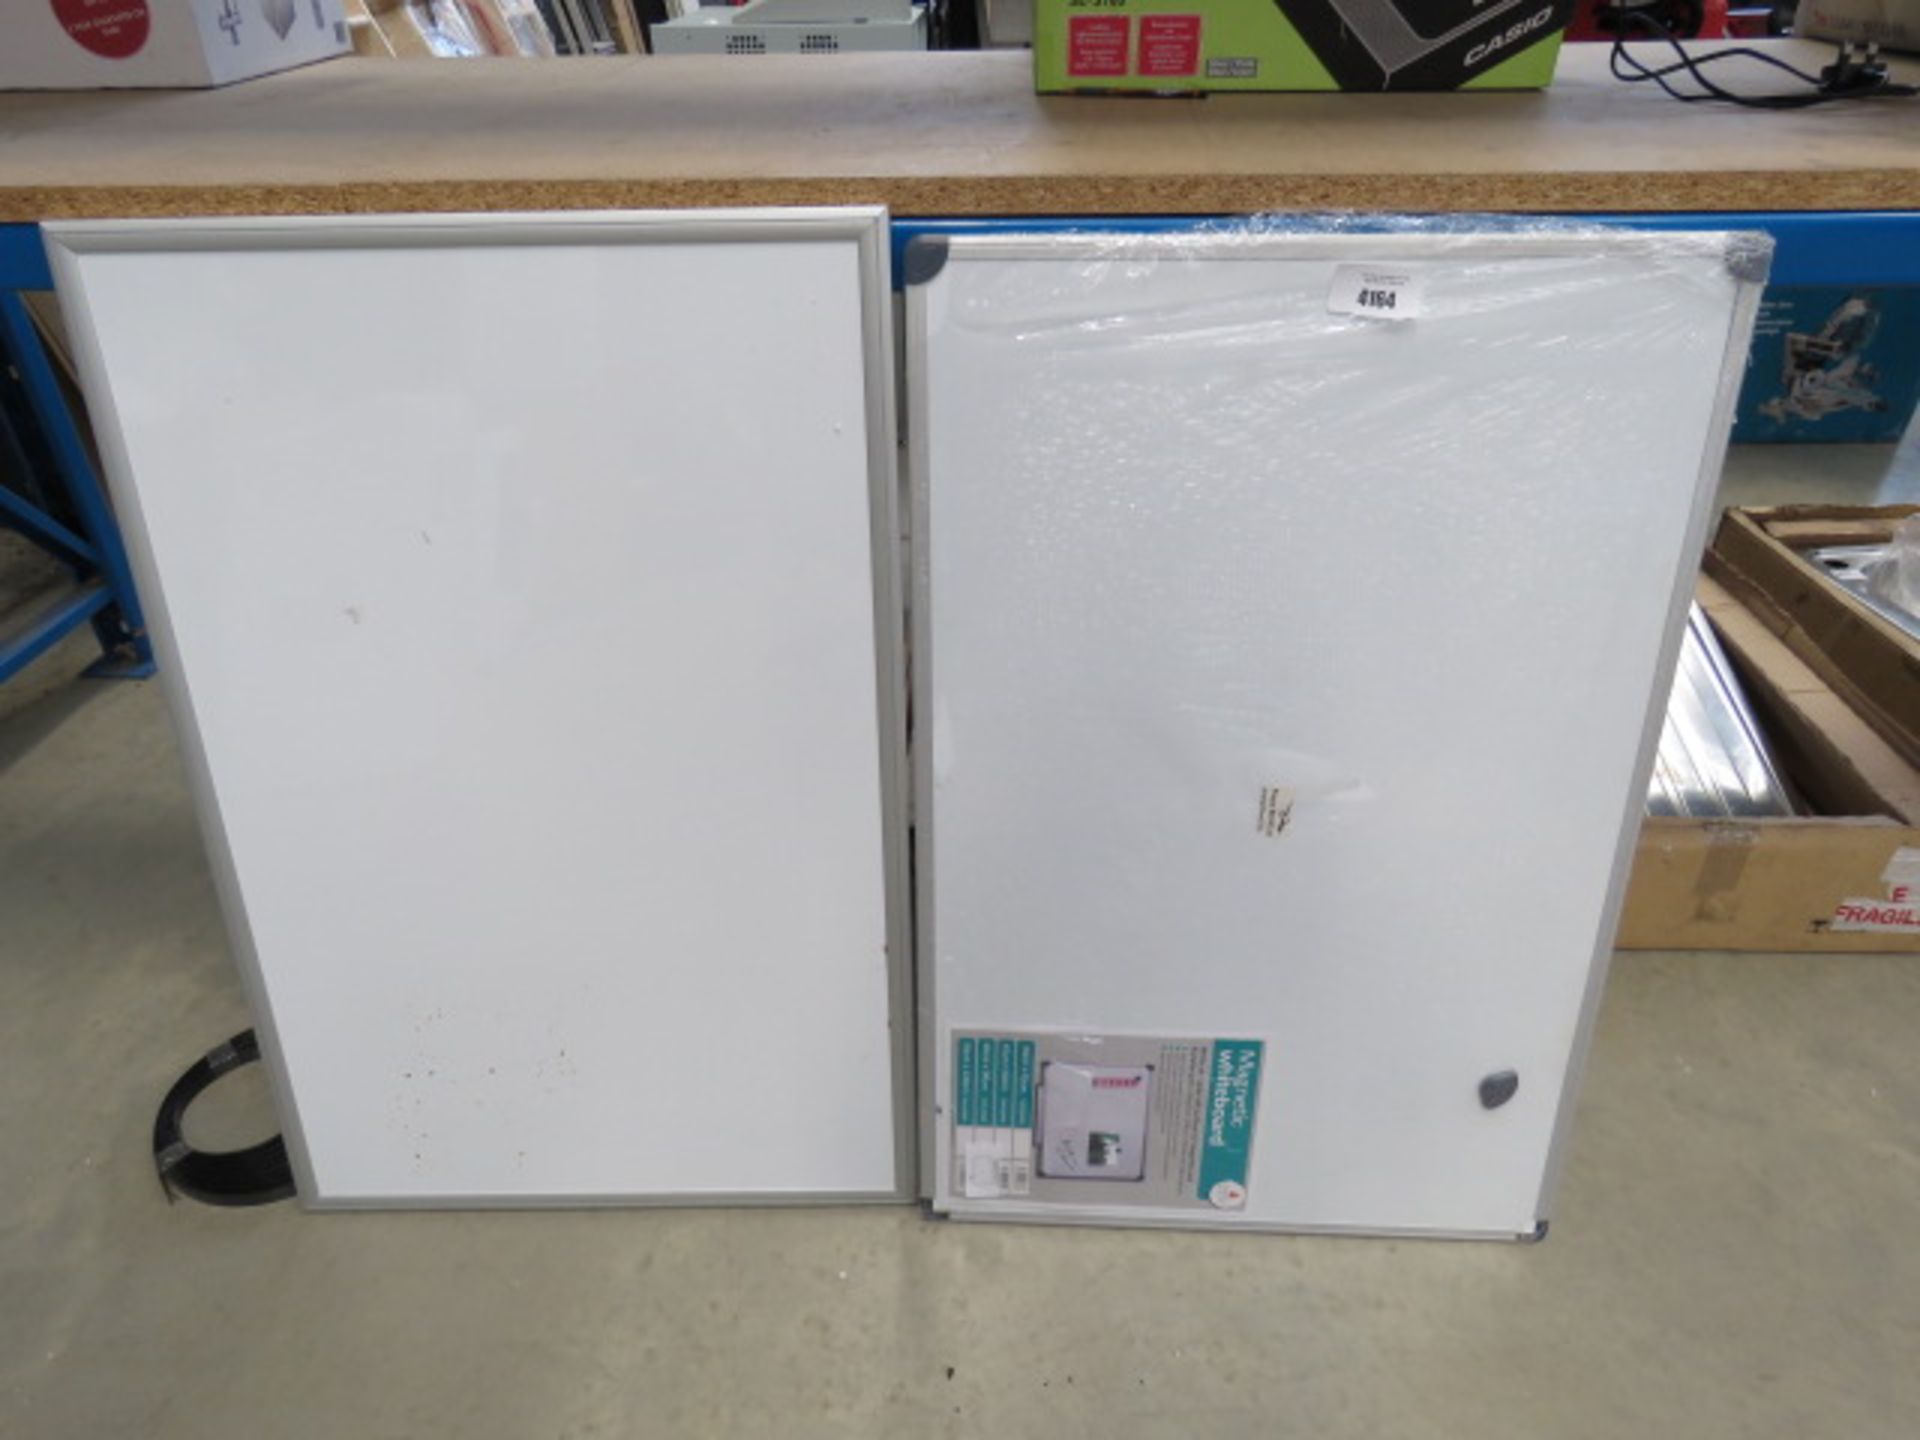 Two whiteboards